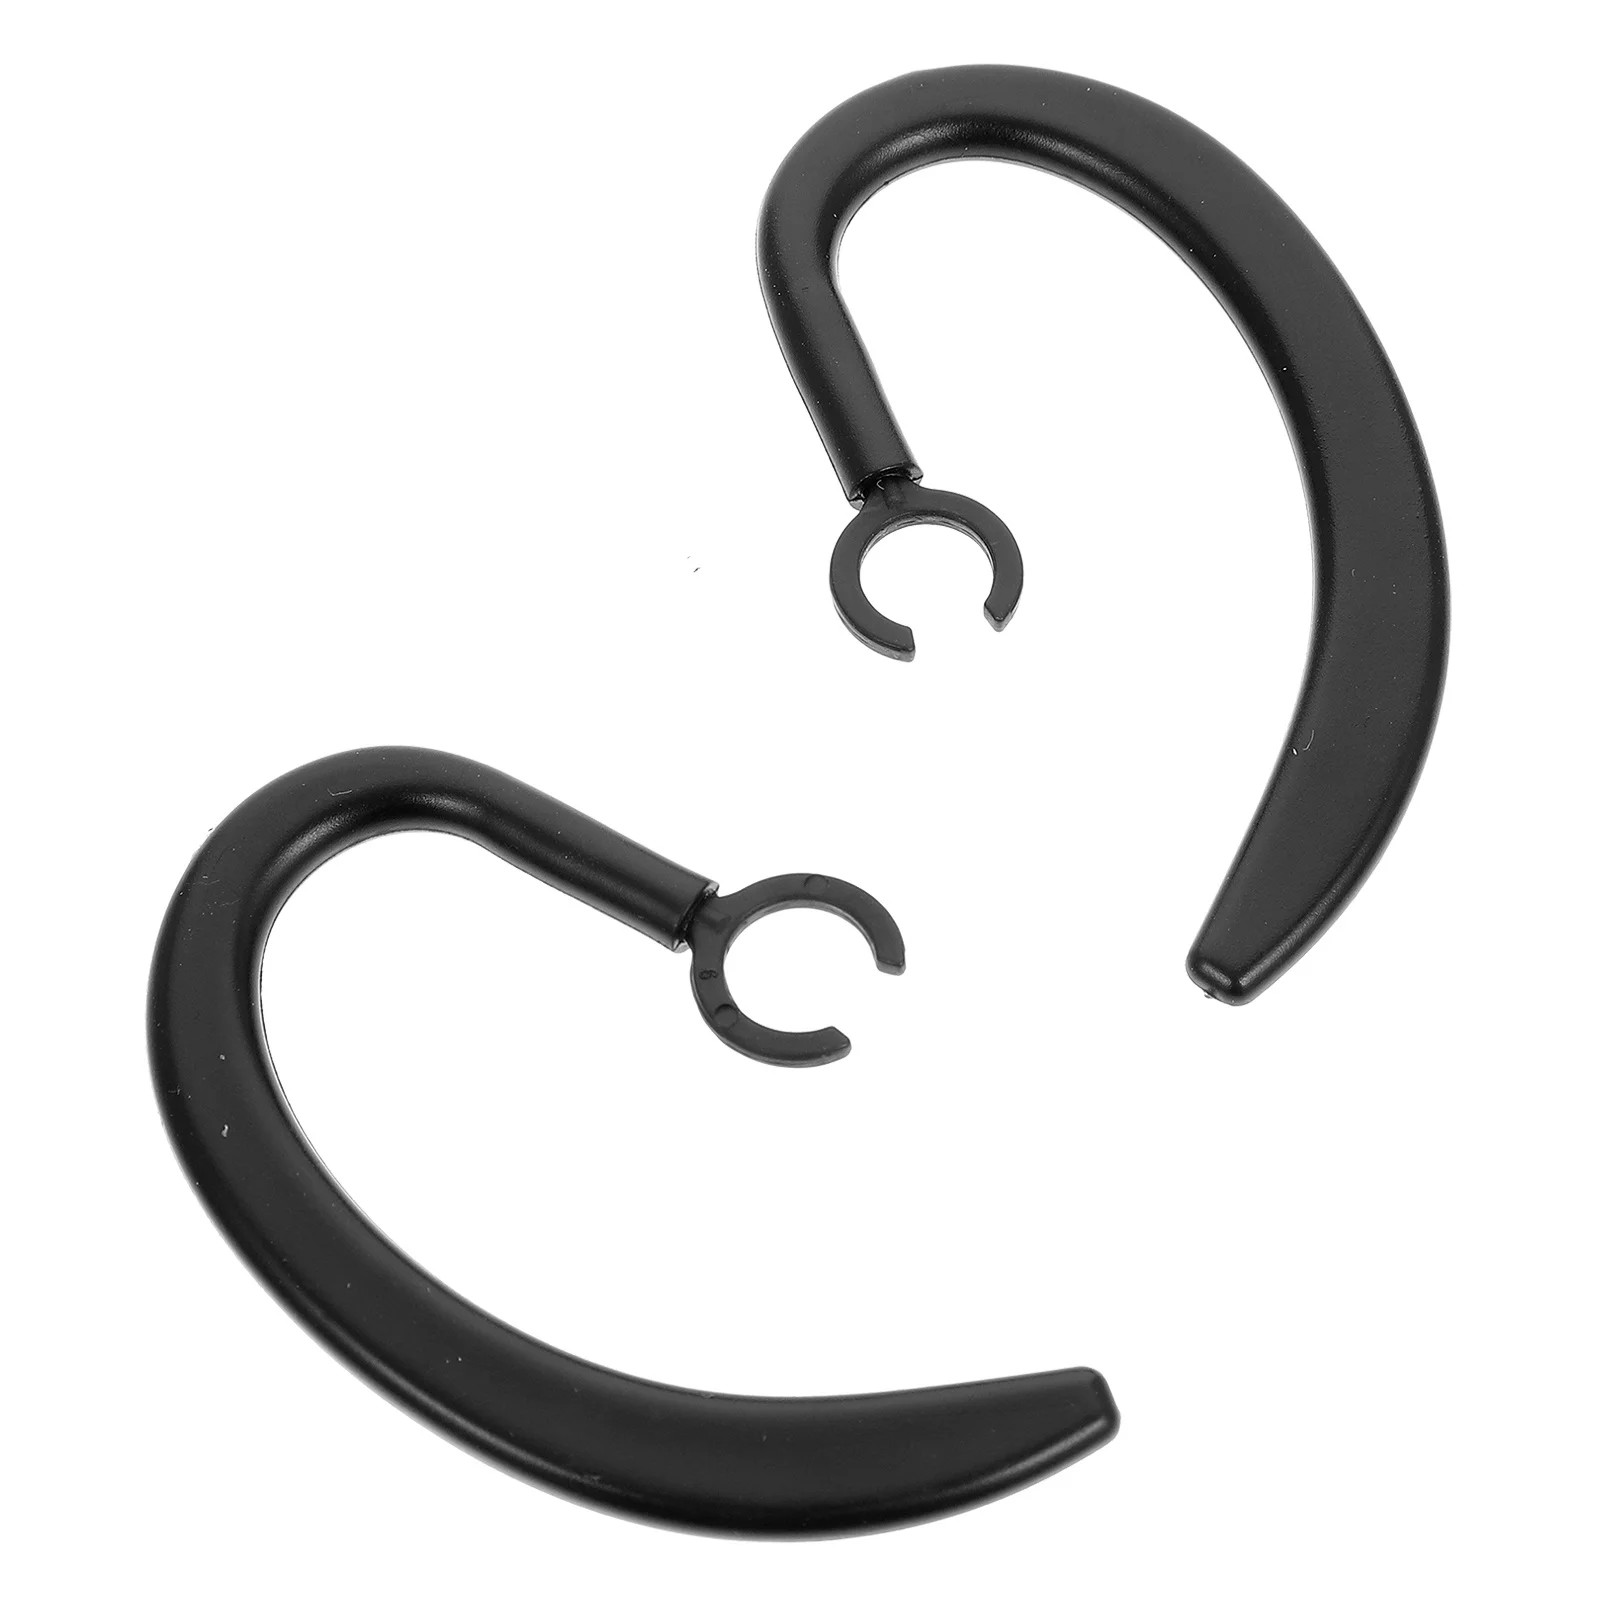 

2 Pcs Headset Earhook Rubber Hooks Plugs Anti-lost Rotation Headsets Earpiece Clamp Headphone Clip for Earbuds